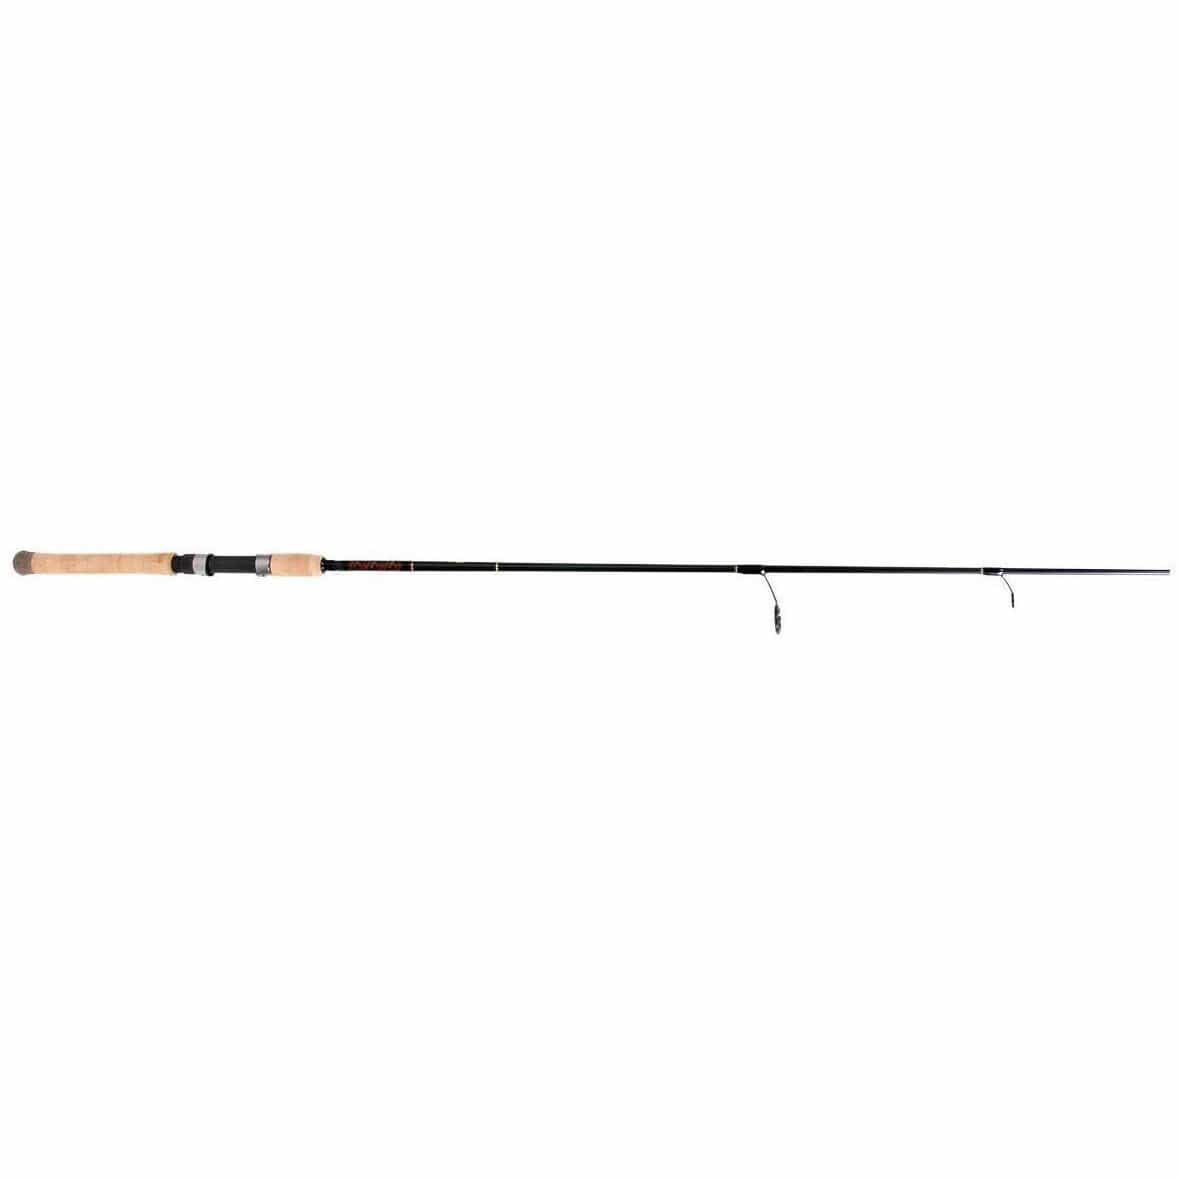 Silstar Glass Classic 6'6 6pc Spin/fly Reversible Rod W/ Tube Near Mint